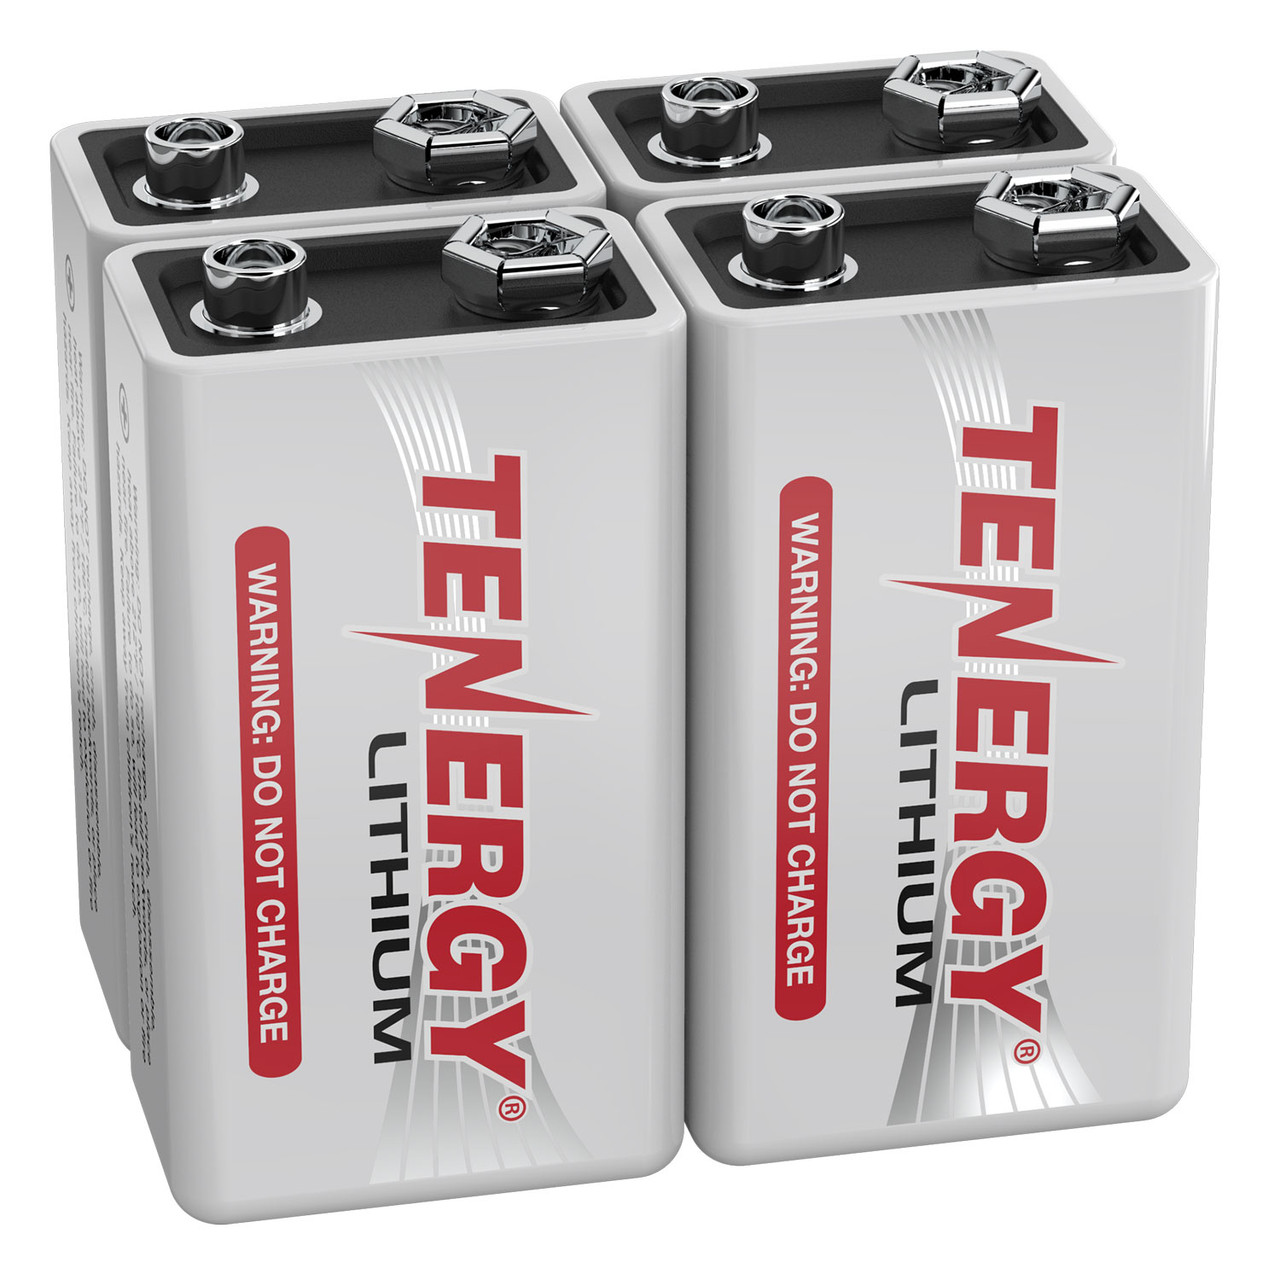 4-Pack, Tenergy 9V Lithium Battery, 1200mah with 10 years shelf life - [Non-Rechargeable]